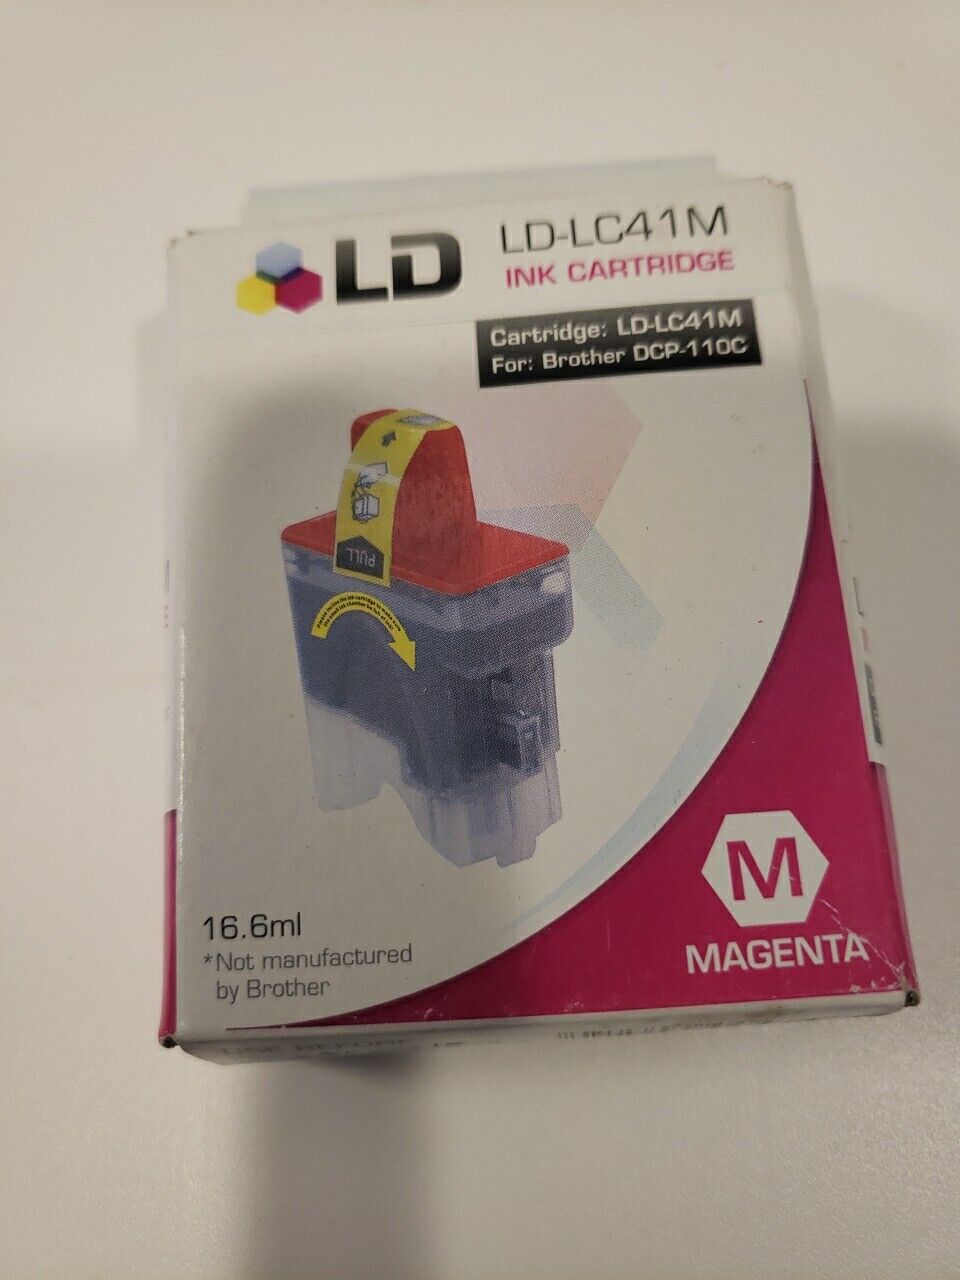 LD HP324 Ink Cartridge for HP564XL Magenta High Yield Expired 02.2013